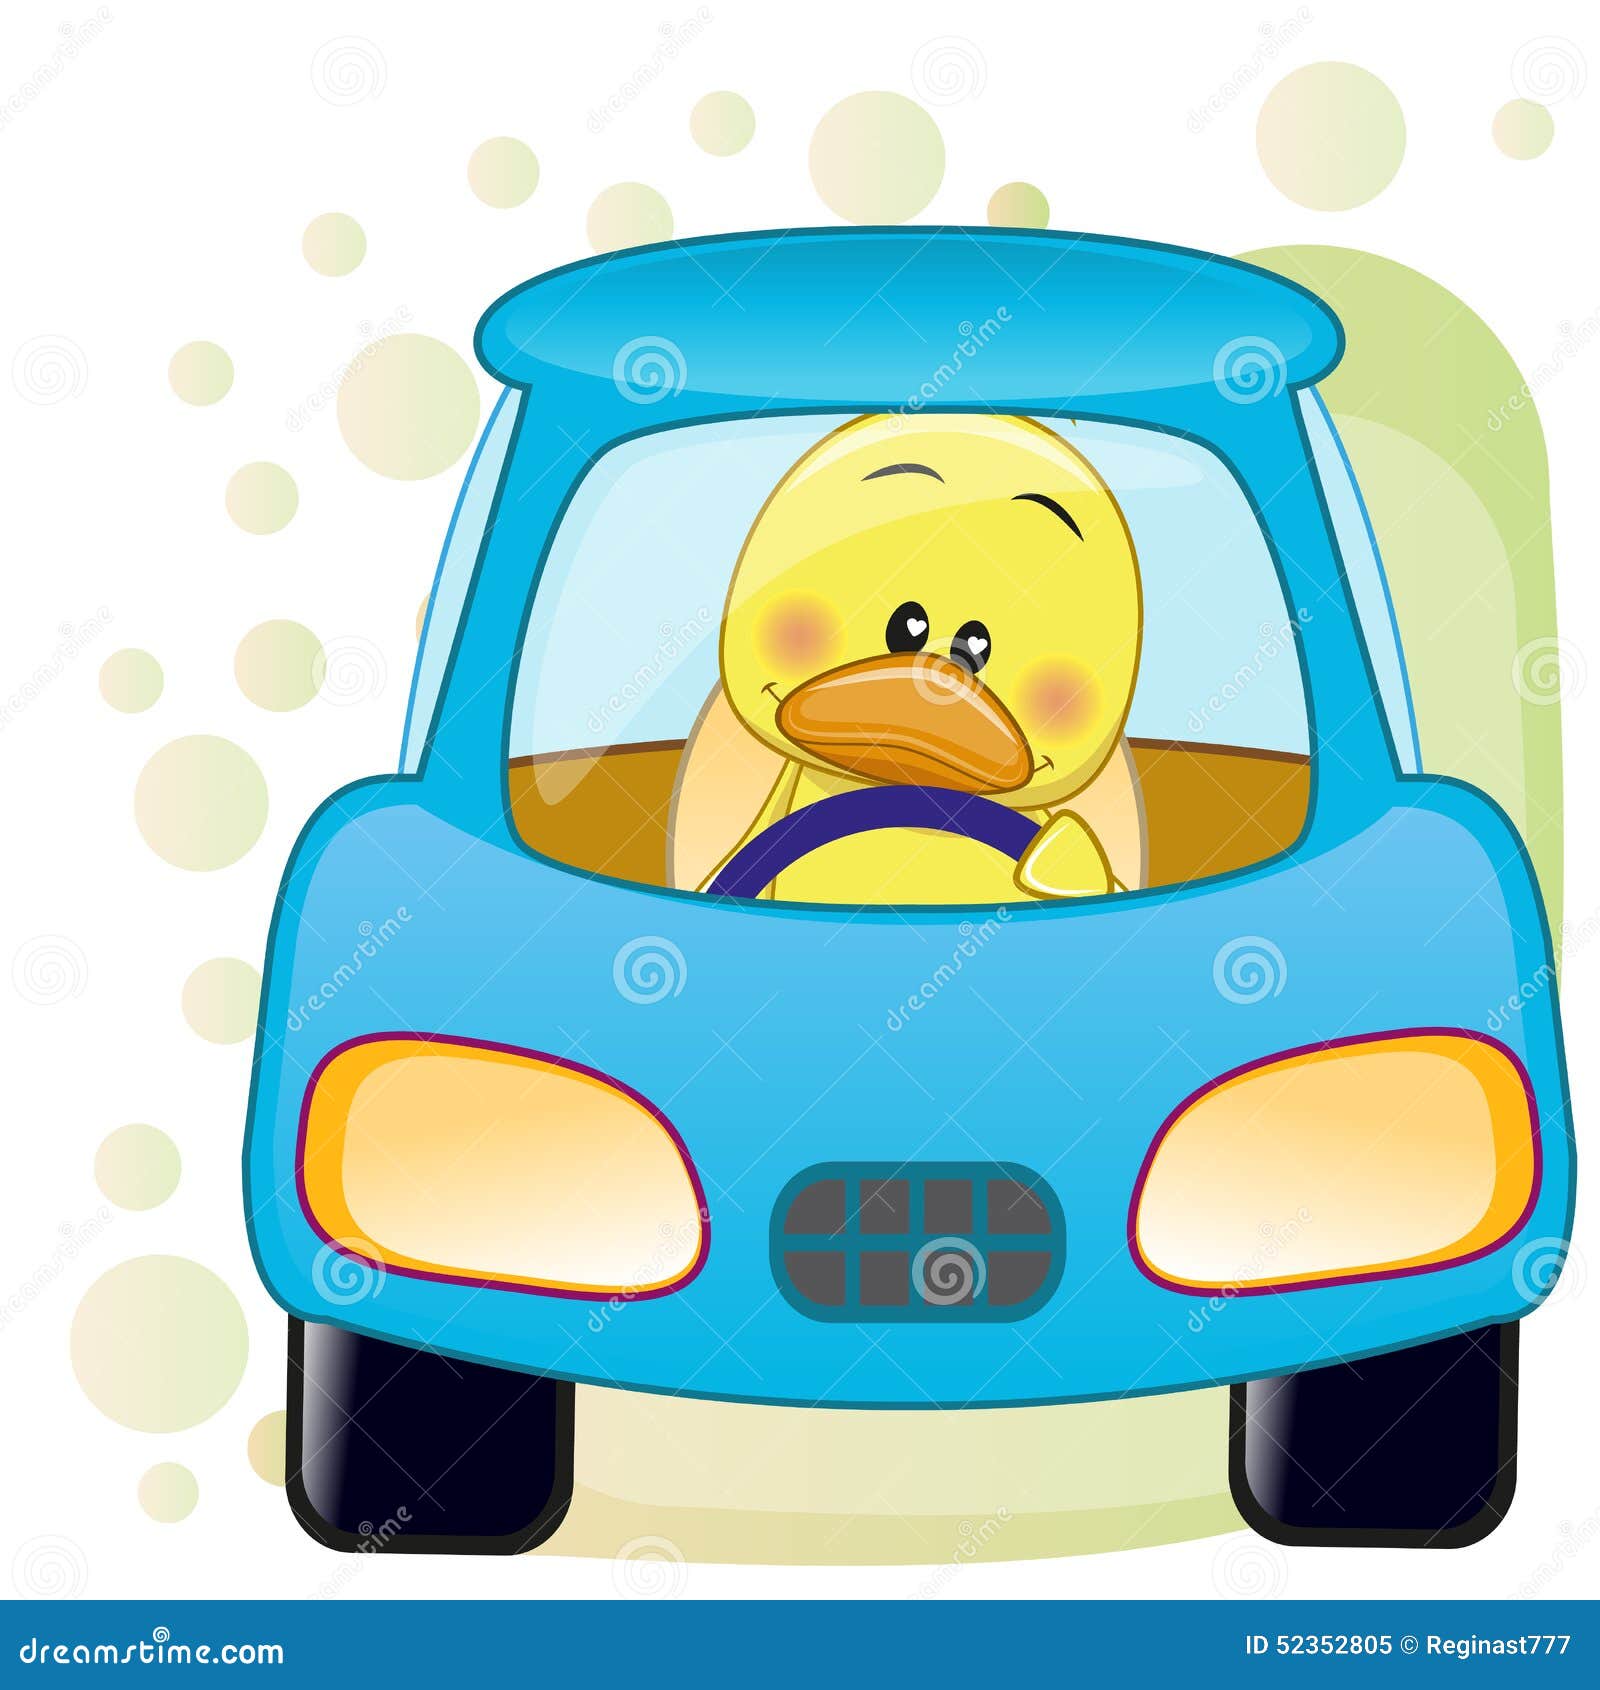 Duck in a car stock vector. Illustration of clip, happiness - 52352805